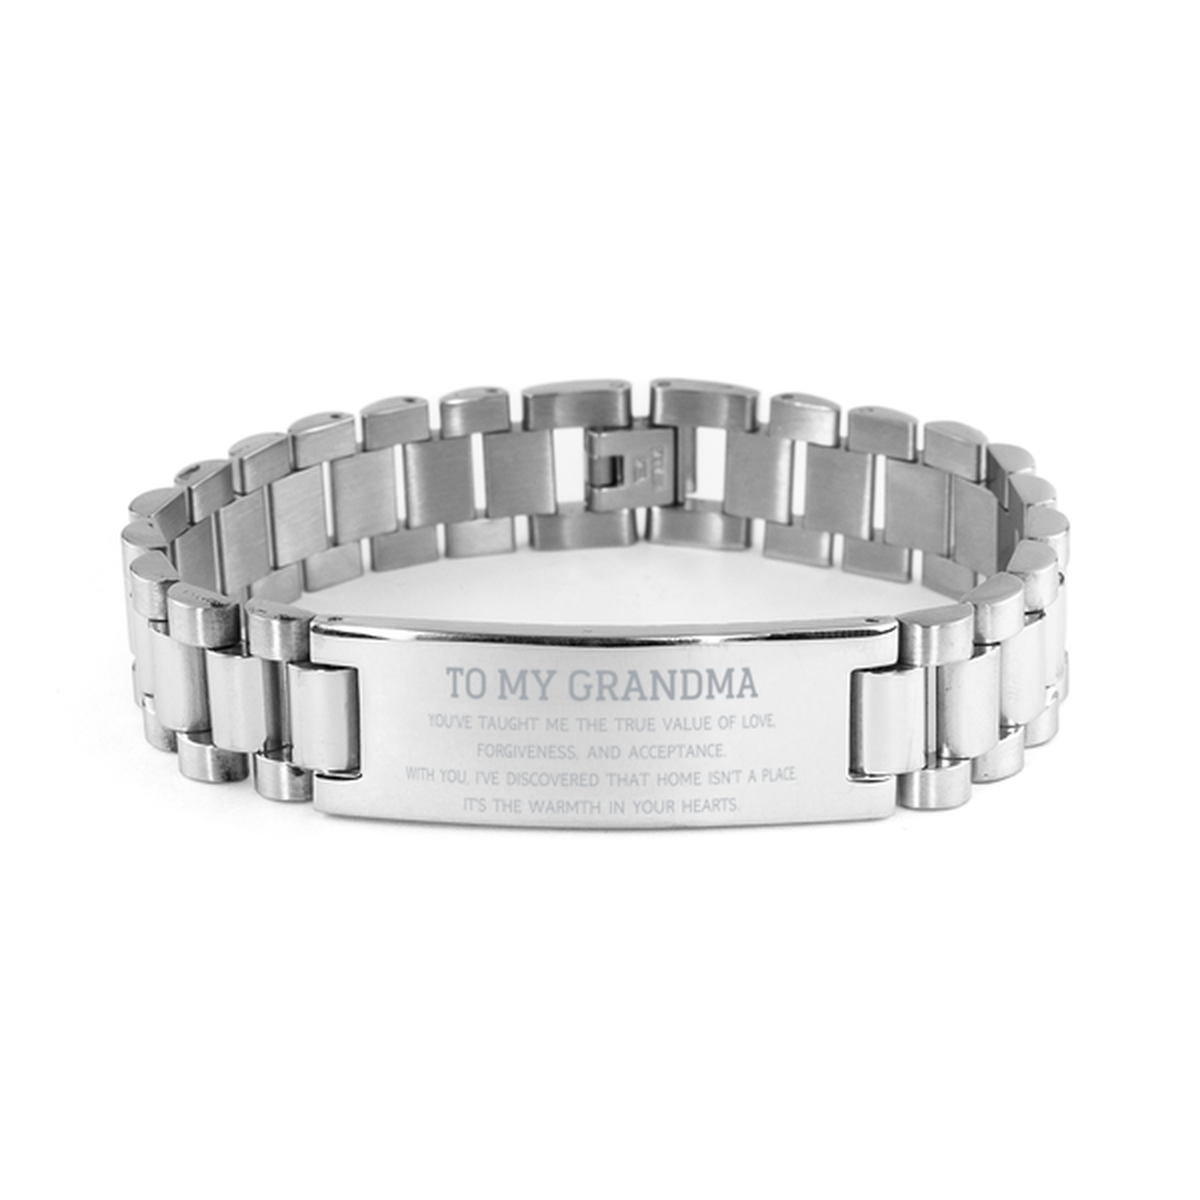 To My Grandma Gifts, You've taught me the true value of love, Thank You Gifts For Grandma, Birthday Ladder Stainless Steel Bracelet For Grandma